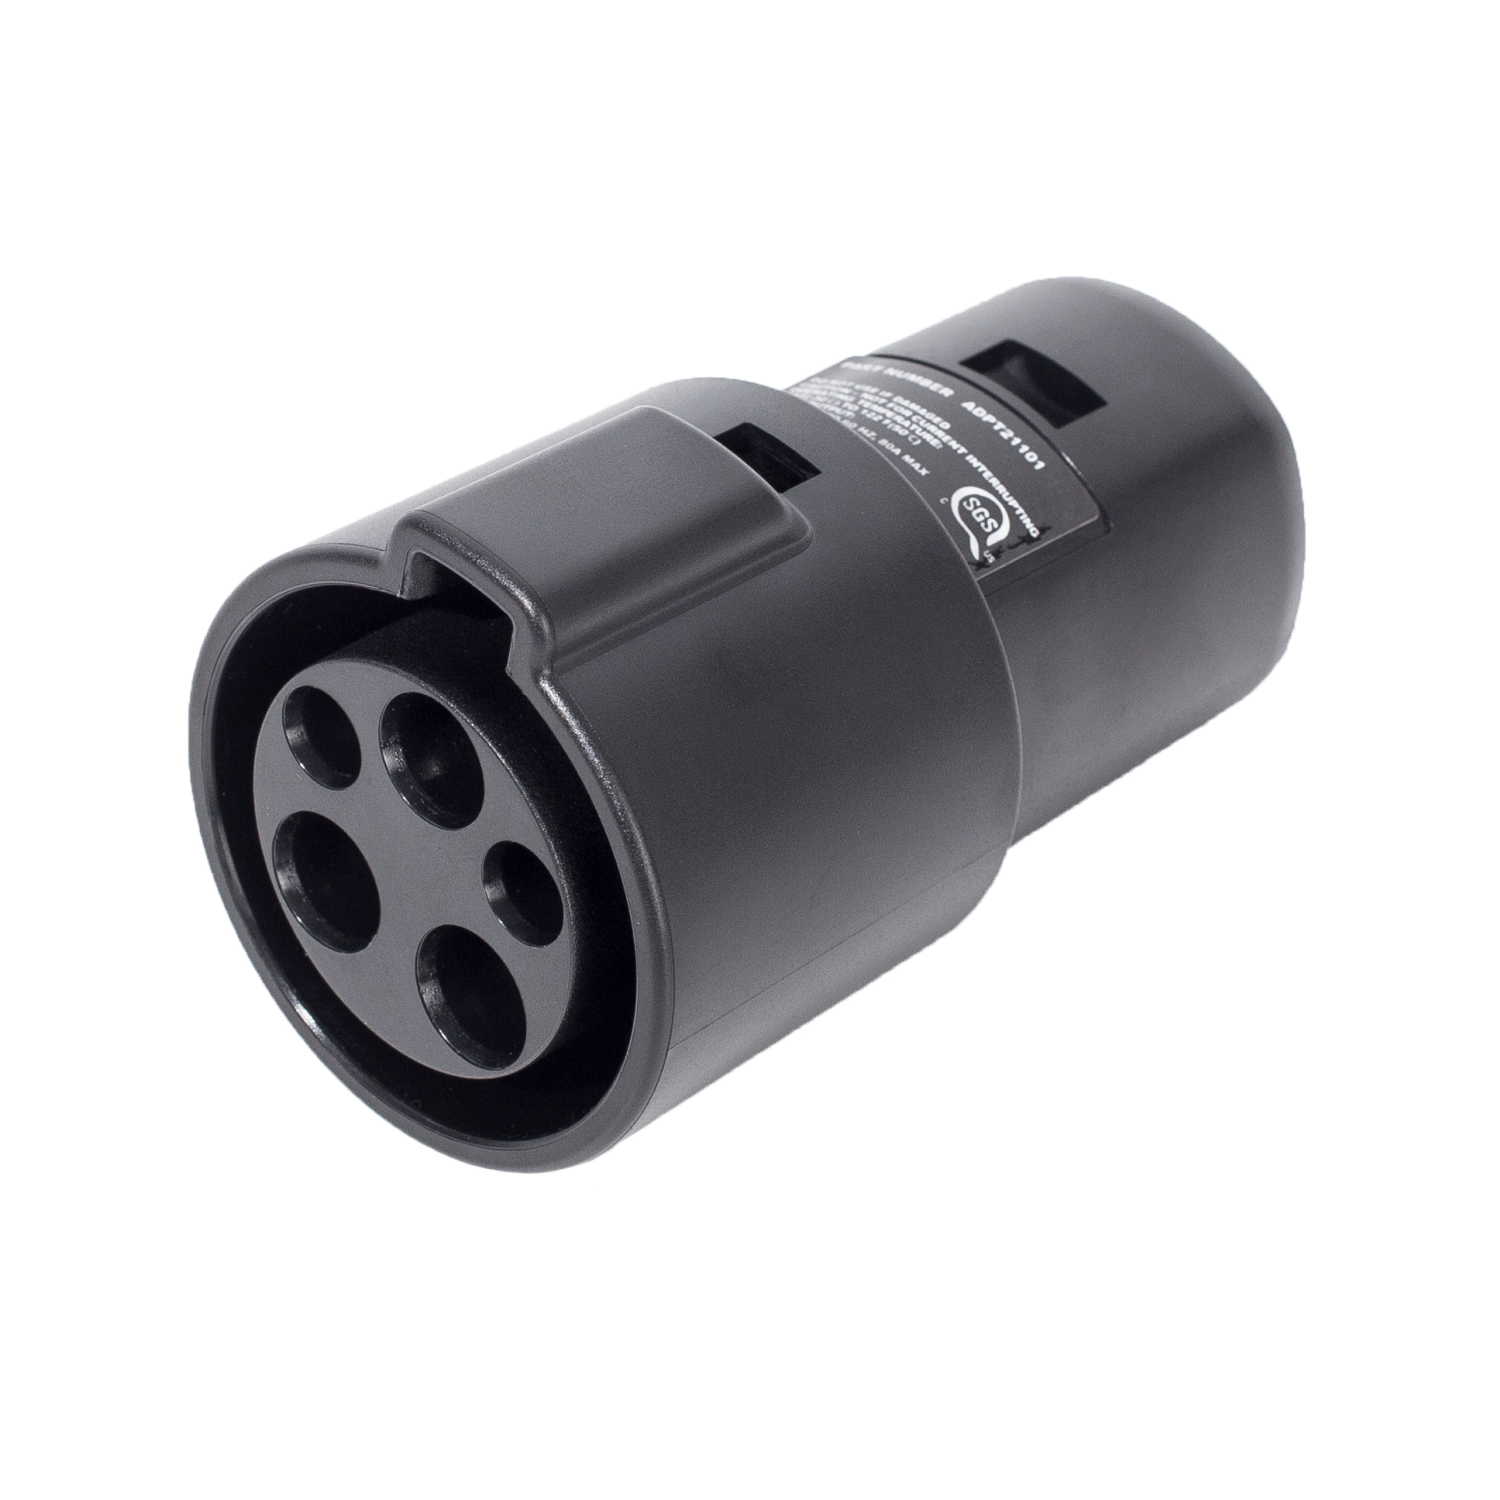 LENZ J1772 to Tesla Charging Adapter Side View with J PLUG Connector Port